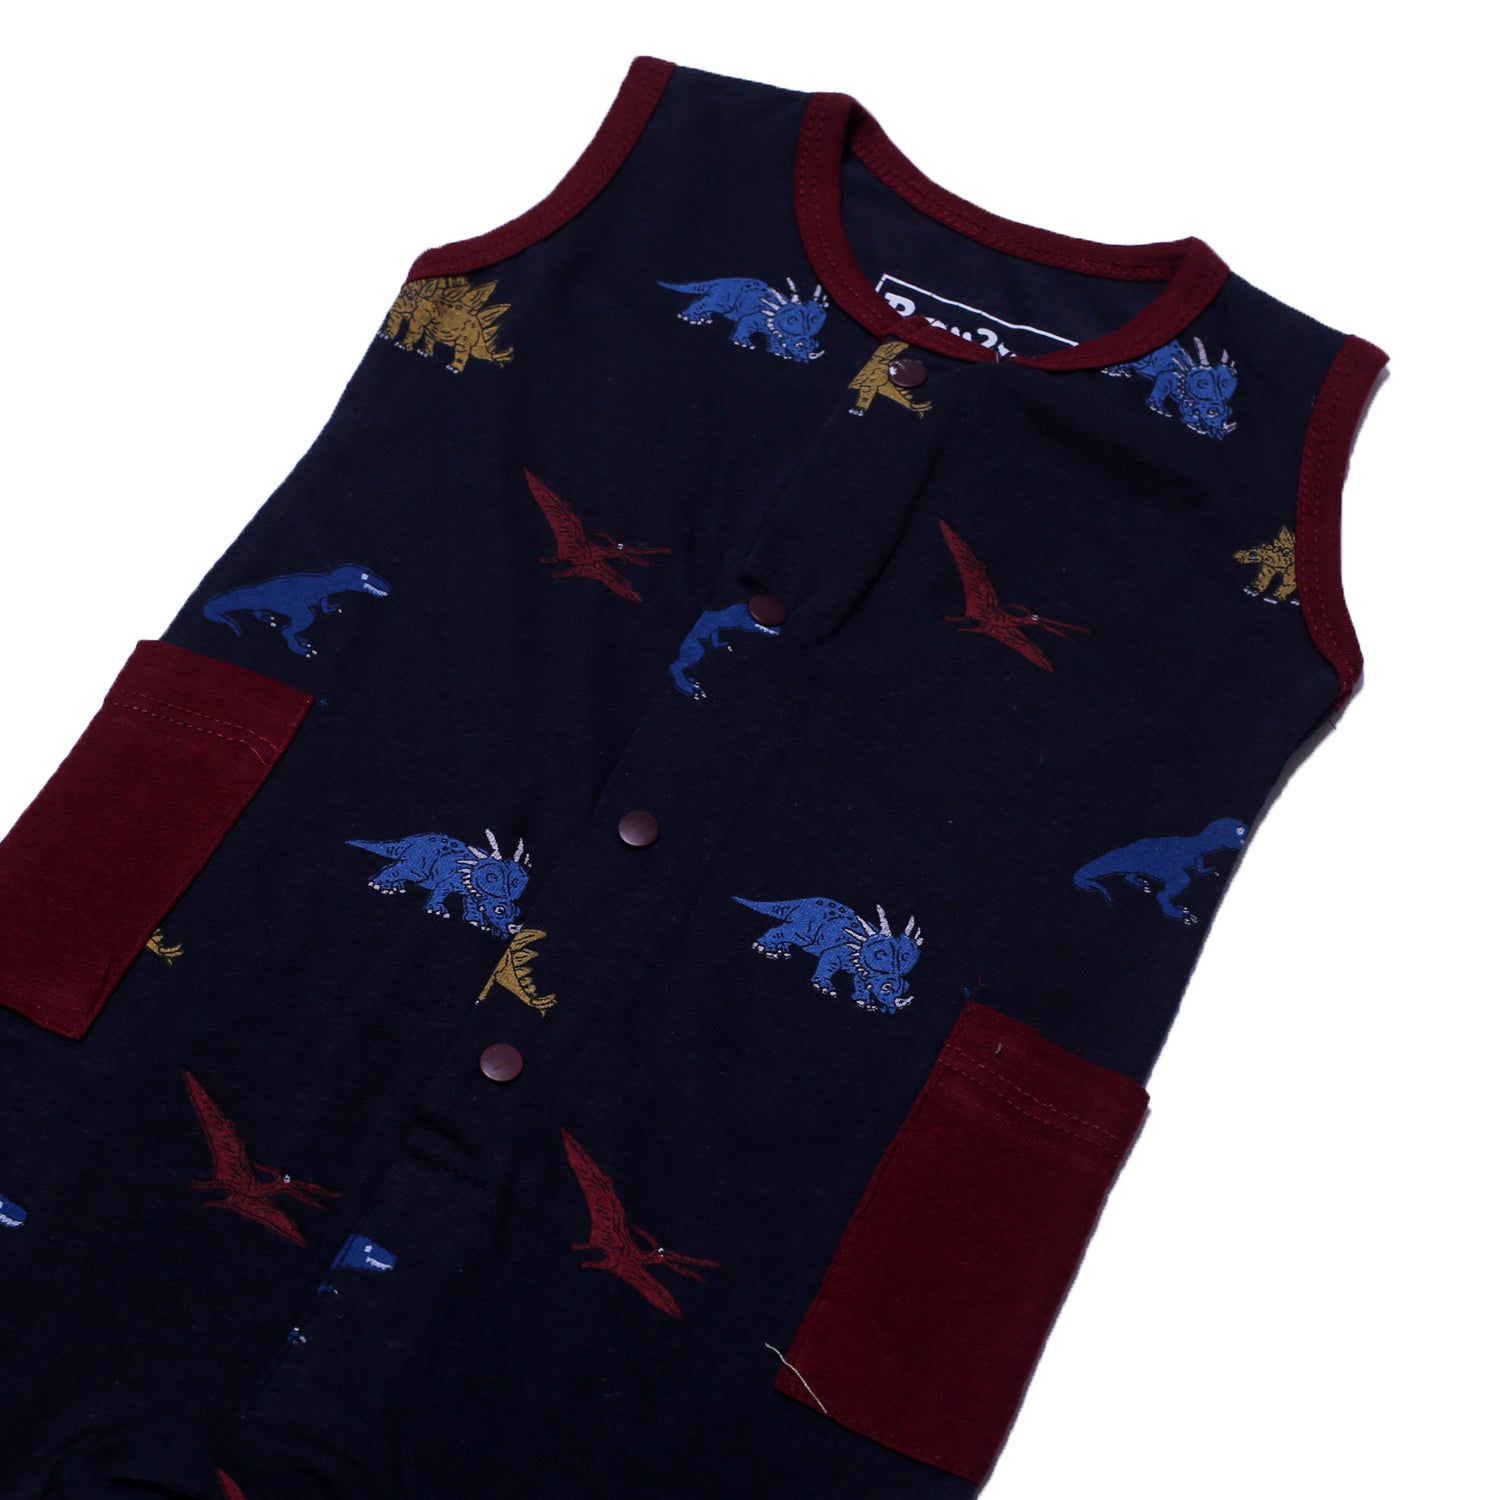 NAVY BLUE FULL BODY SLEEVE LESS DINO PRINTED WITH MAROON POCKETS ROMPER